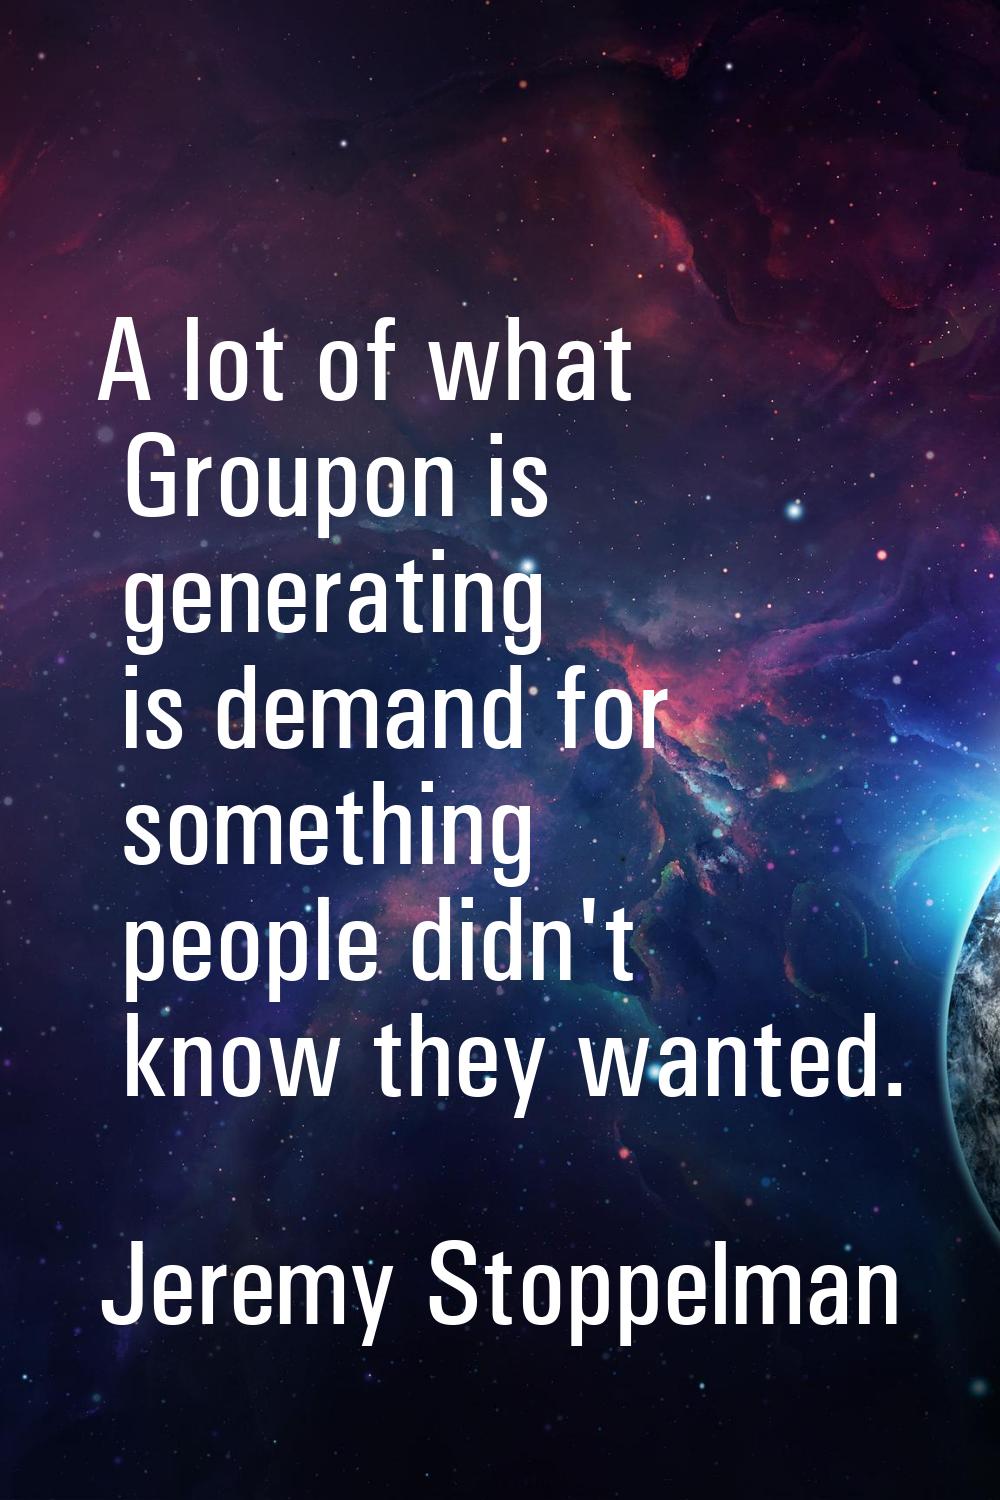 A lot of what Groupon is generating is demand for something people didn't know they wanted.